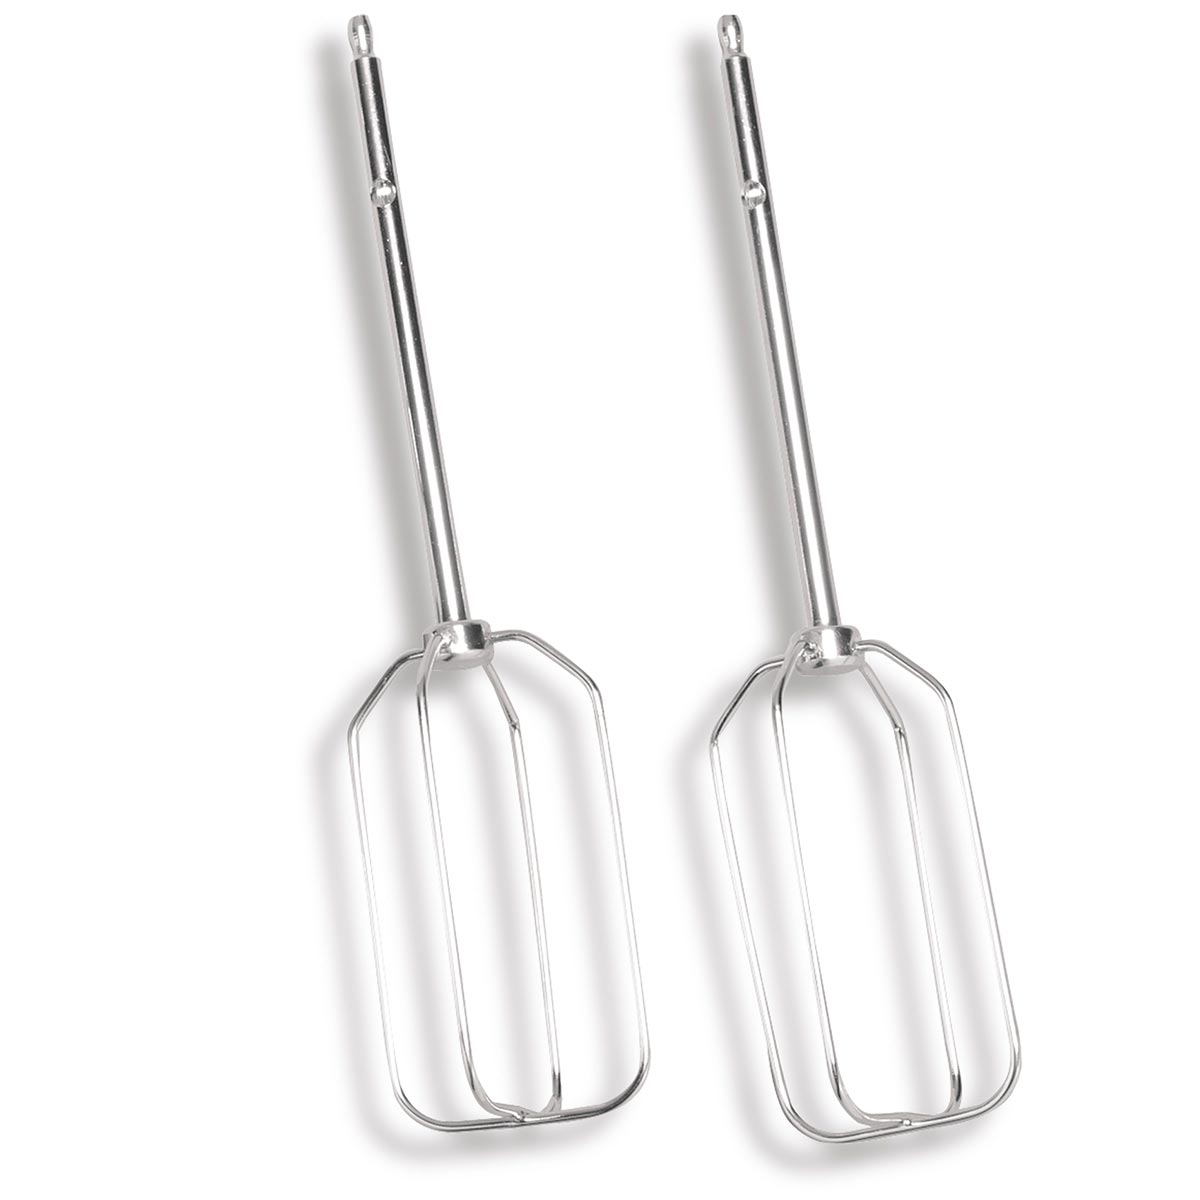 Beater, Wire Set - 62650